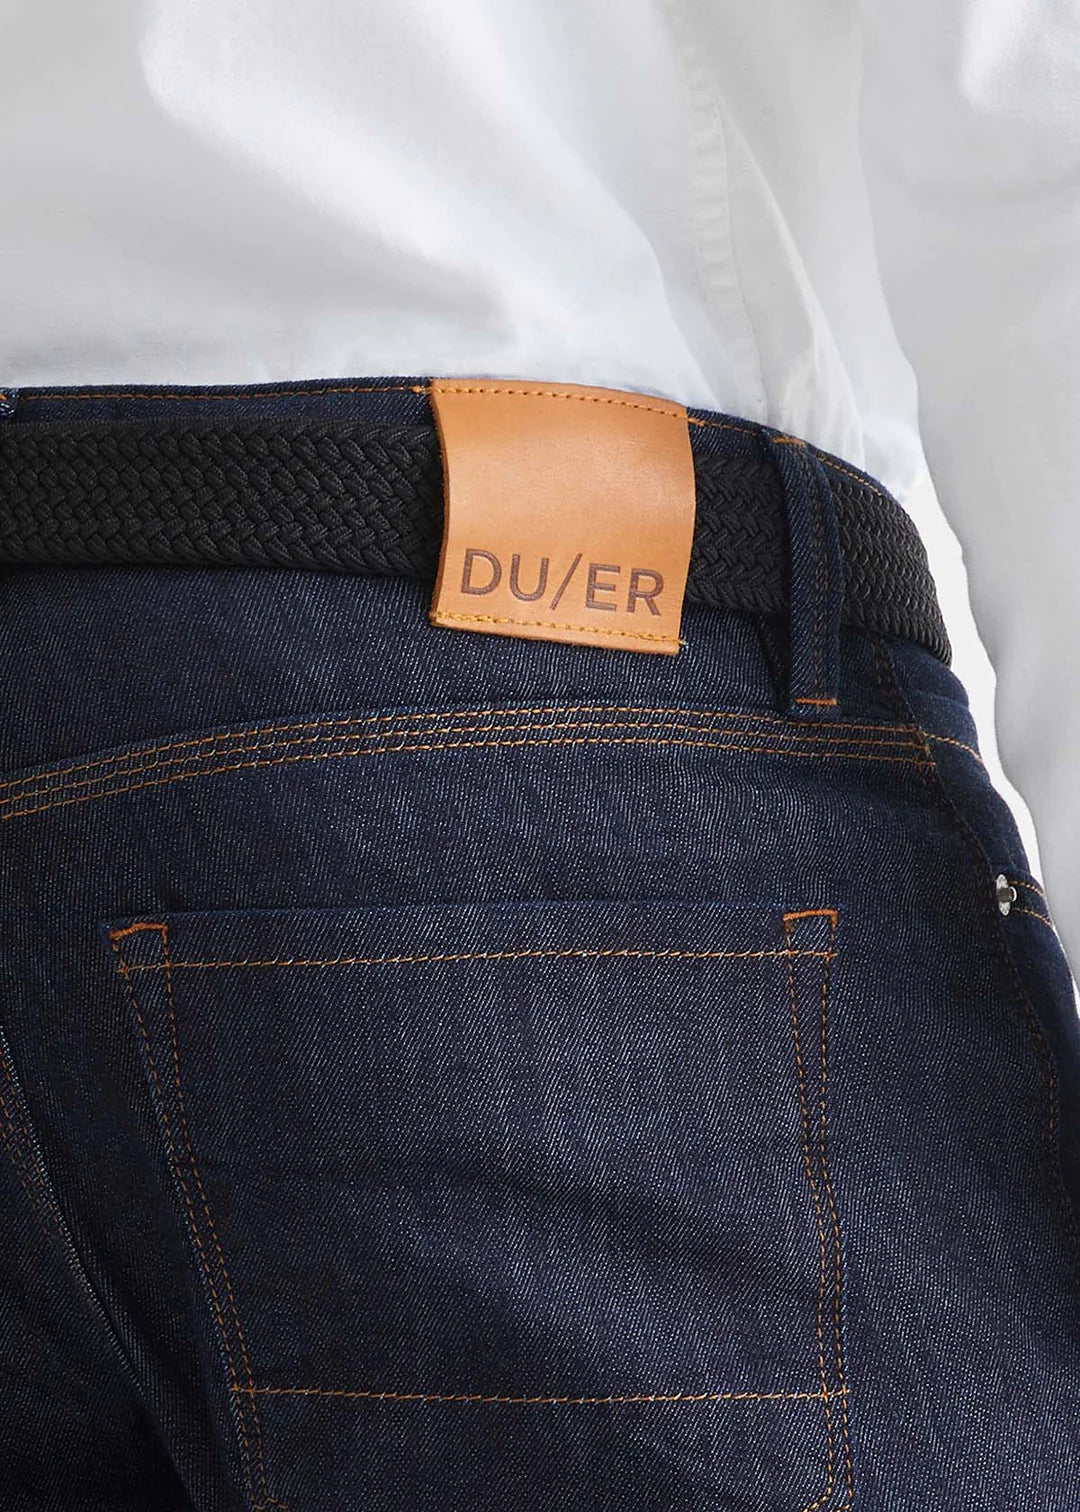 Back view of a man wearing the Performance Stretch Belt by DU/ER in colors Black/Brown